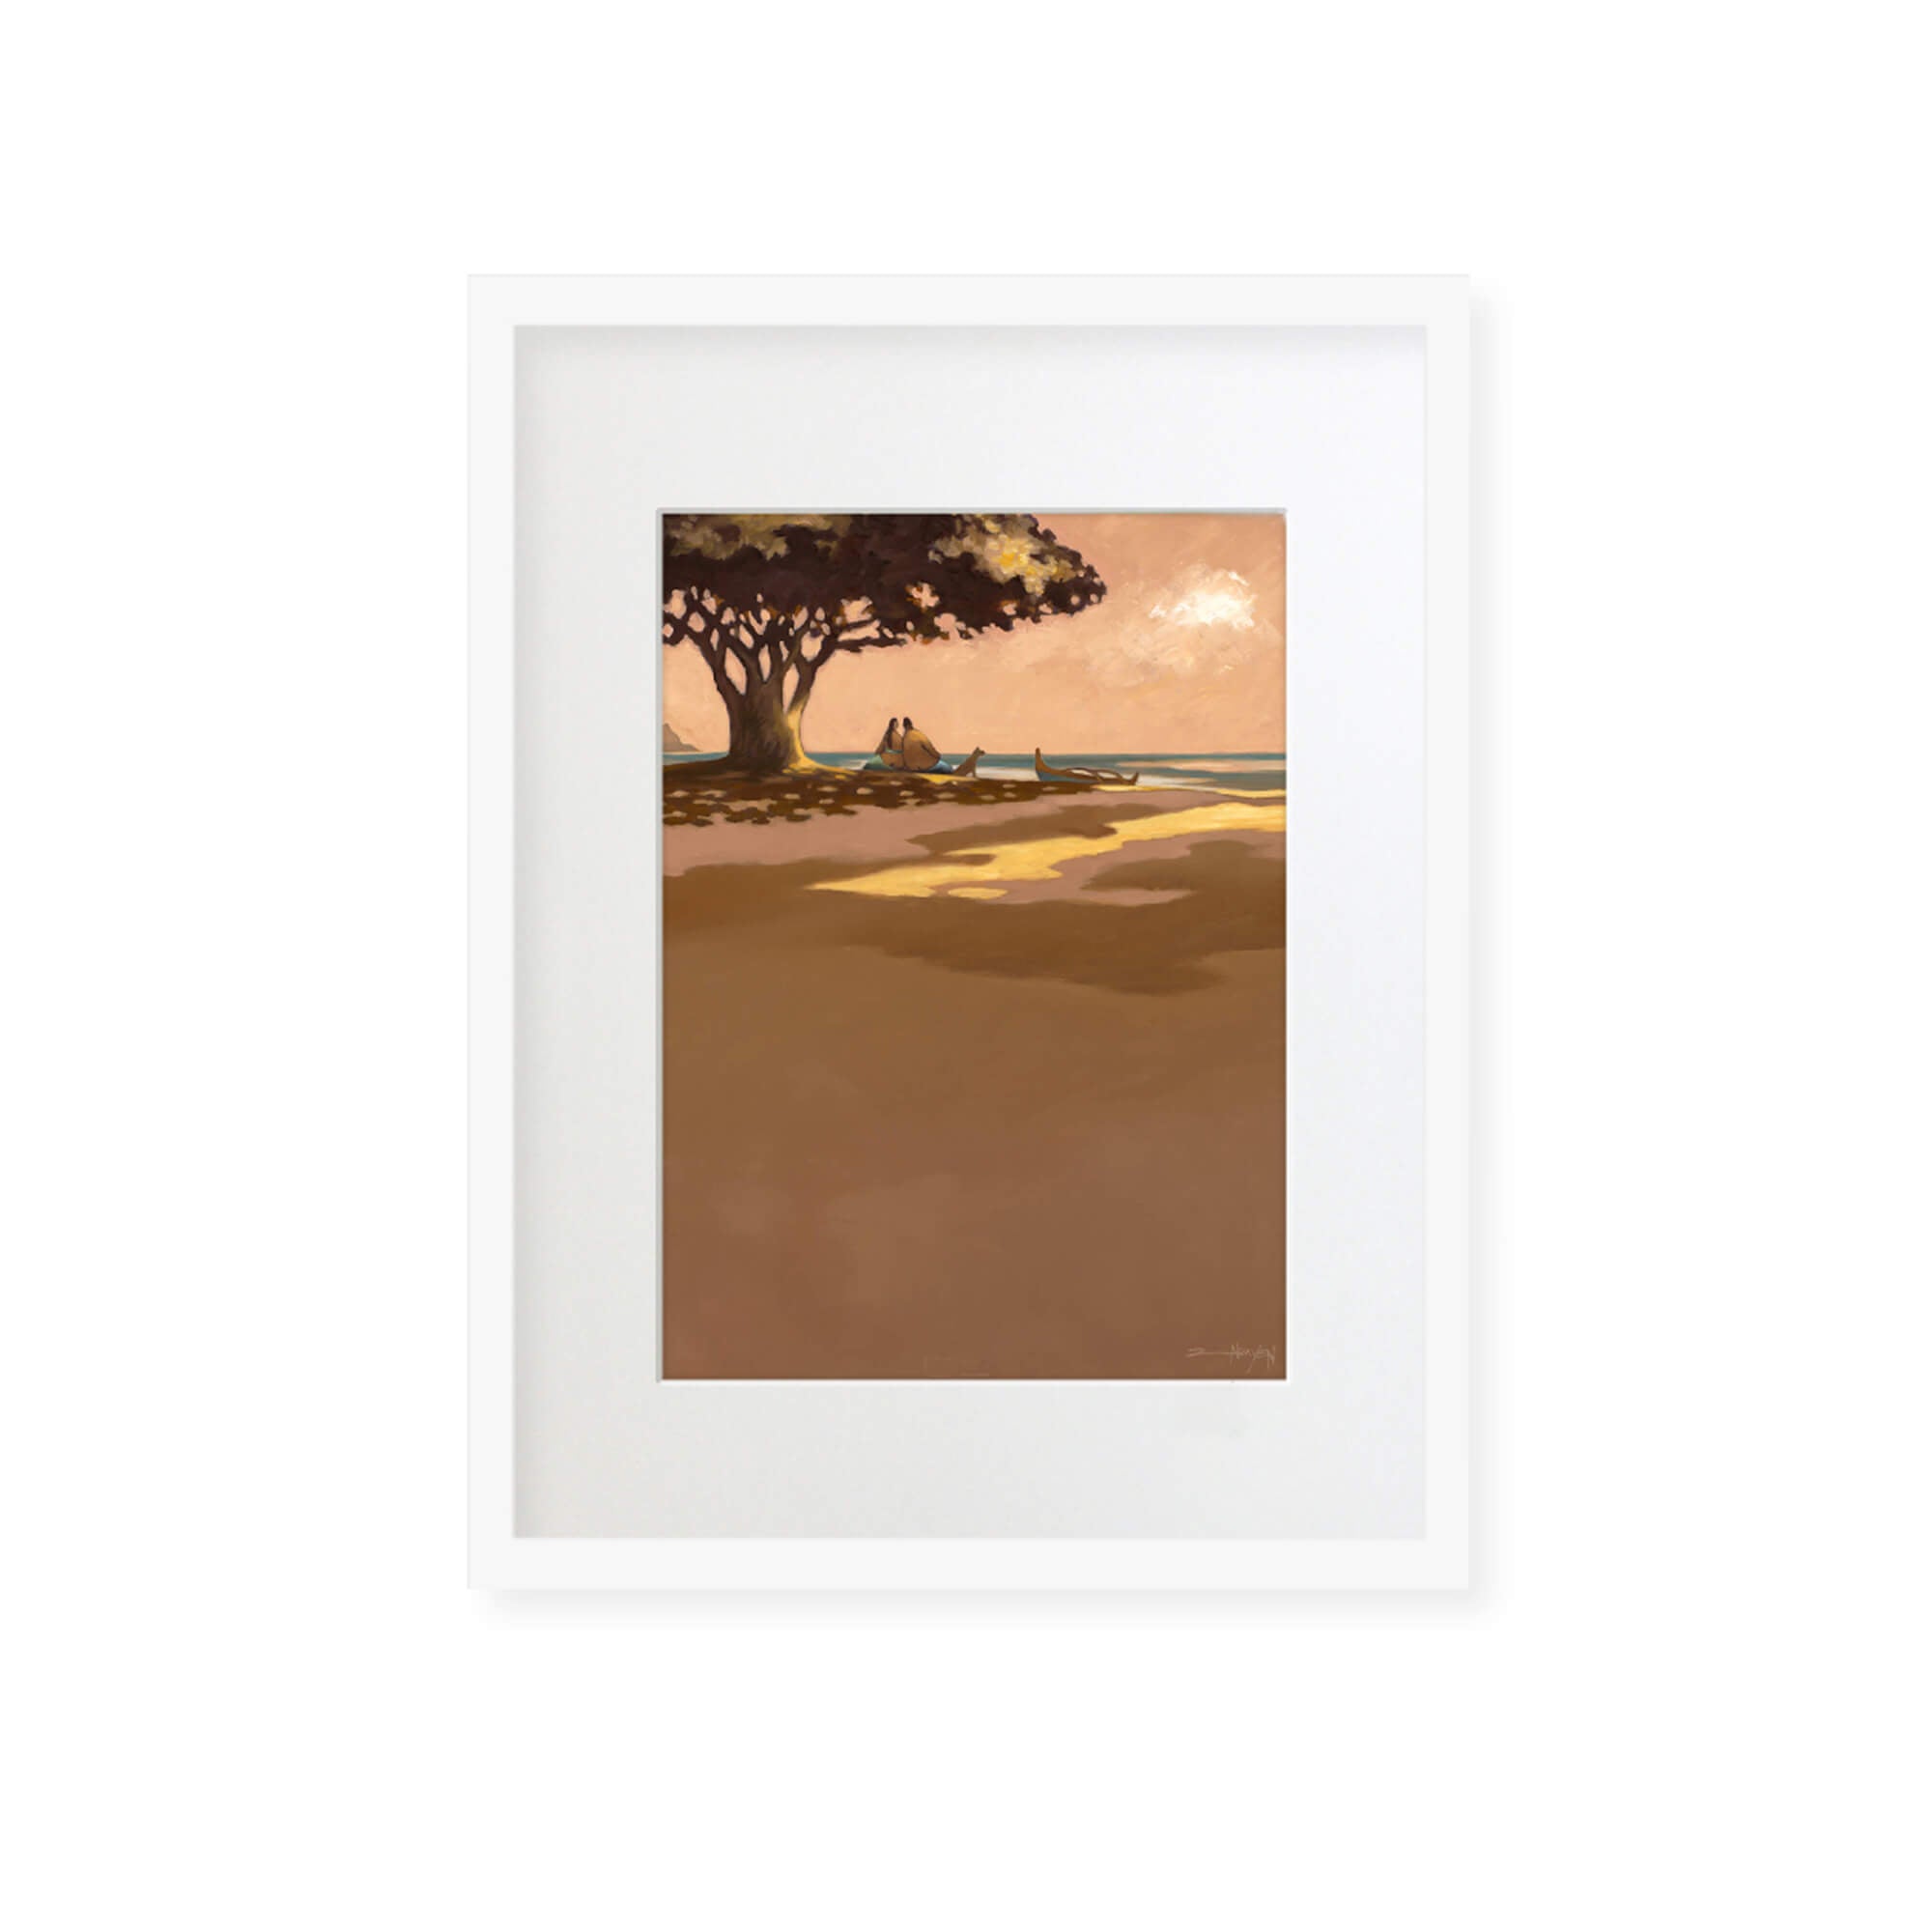 Framed matted art print of a couple with their dog enjoying the sunset view by Hawaii artist Tim Nguyen